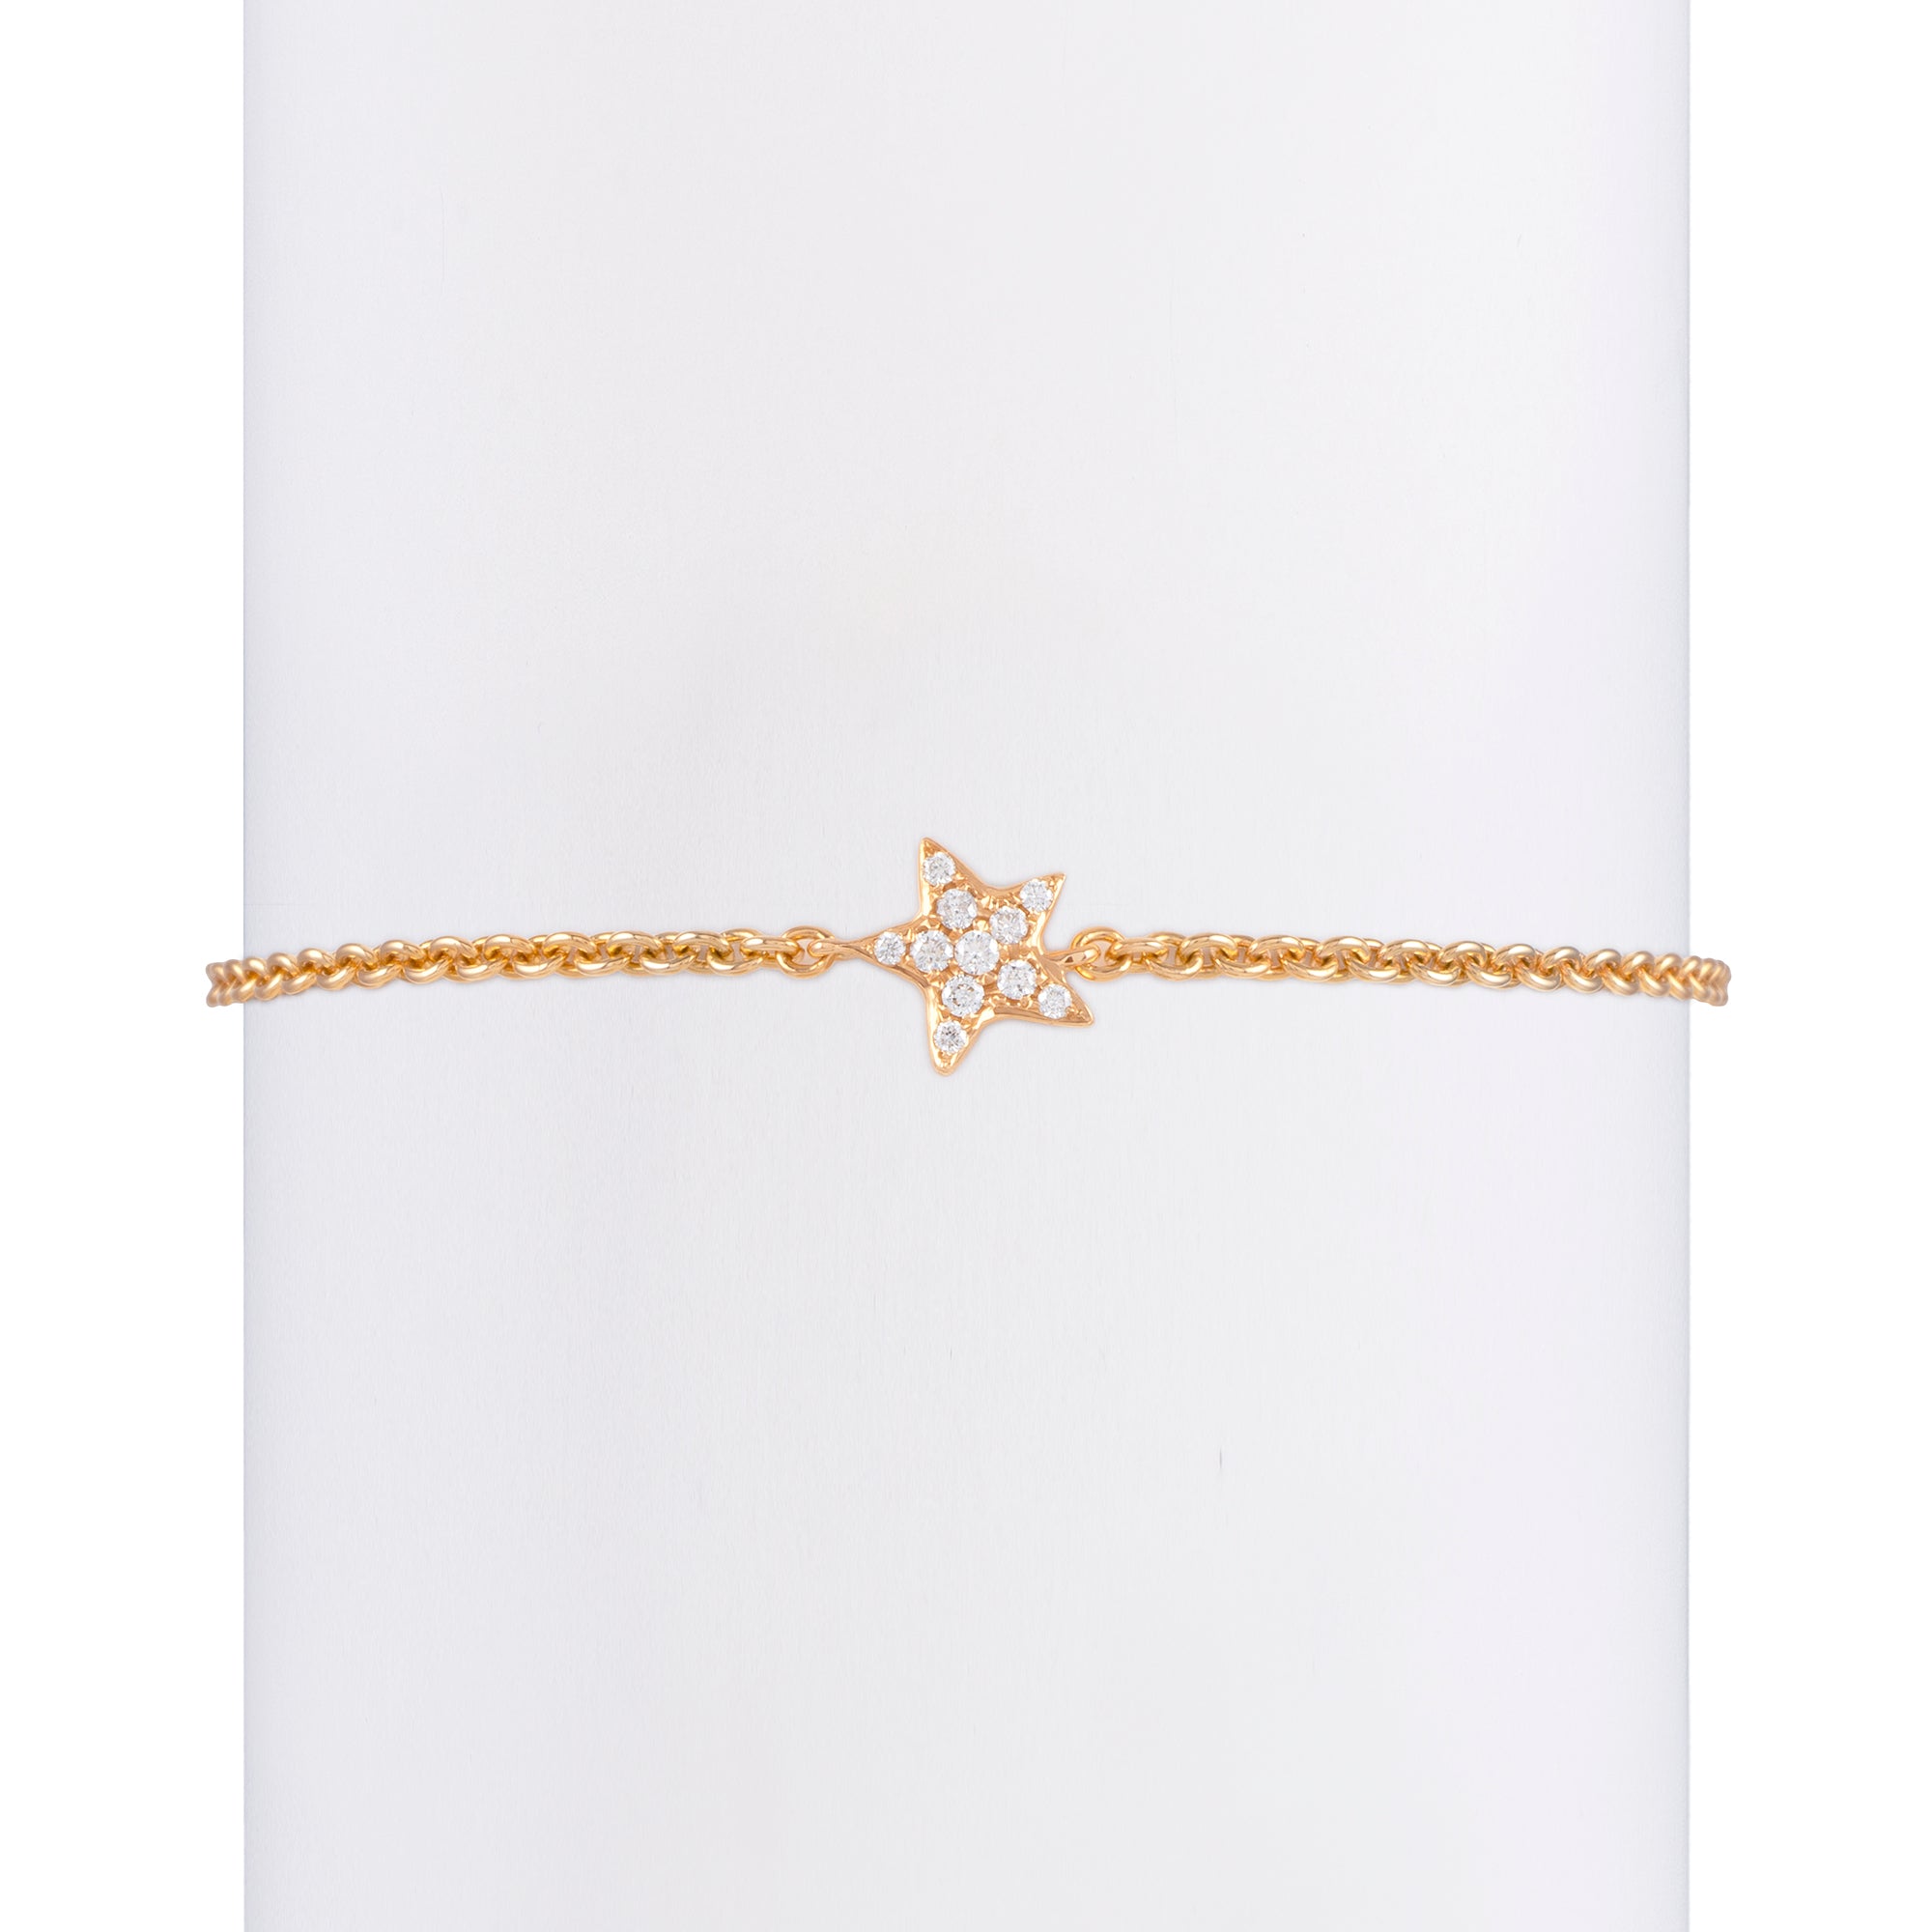 I AM A STAR GIRL children bracelet in pink gold and diamond